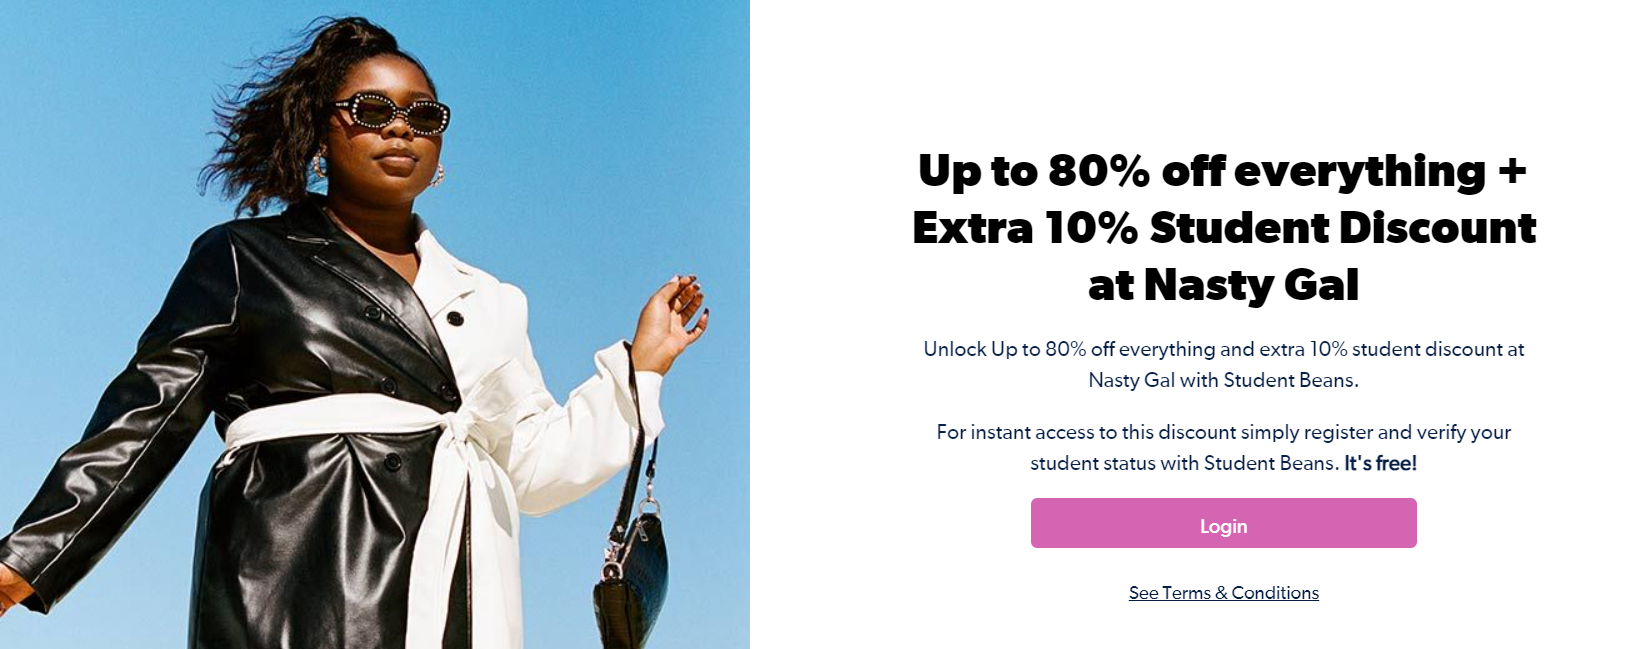 Students discount - Save up to 80% OFF + extra 10% OFF Student discount at Nasty Gal